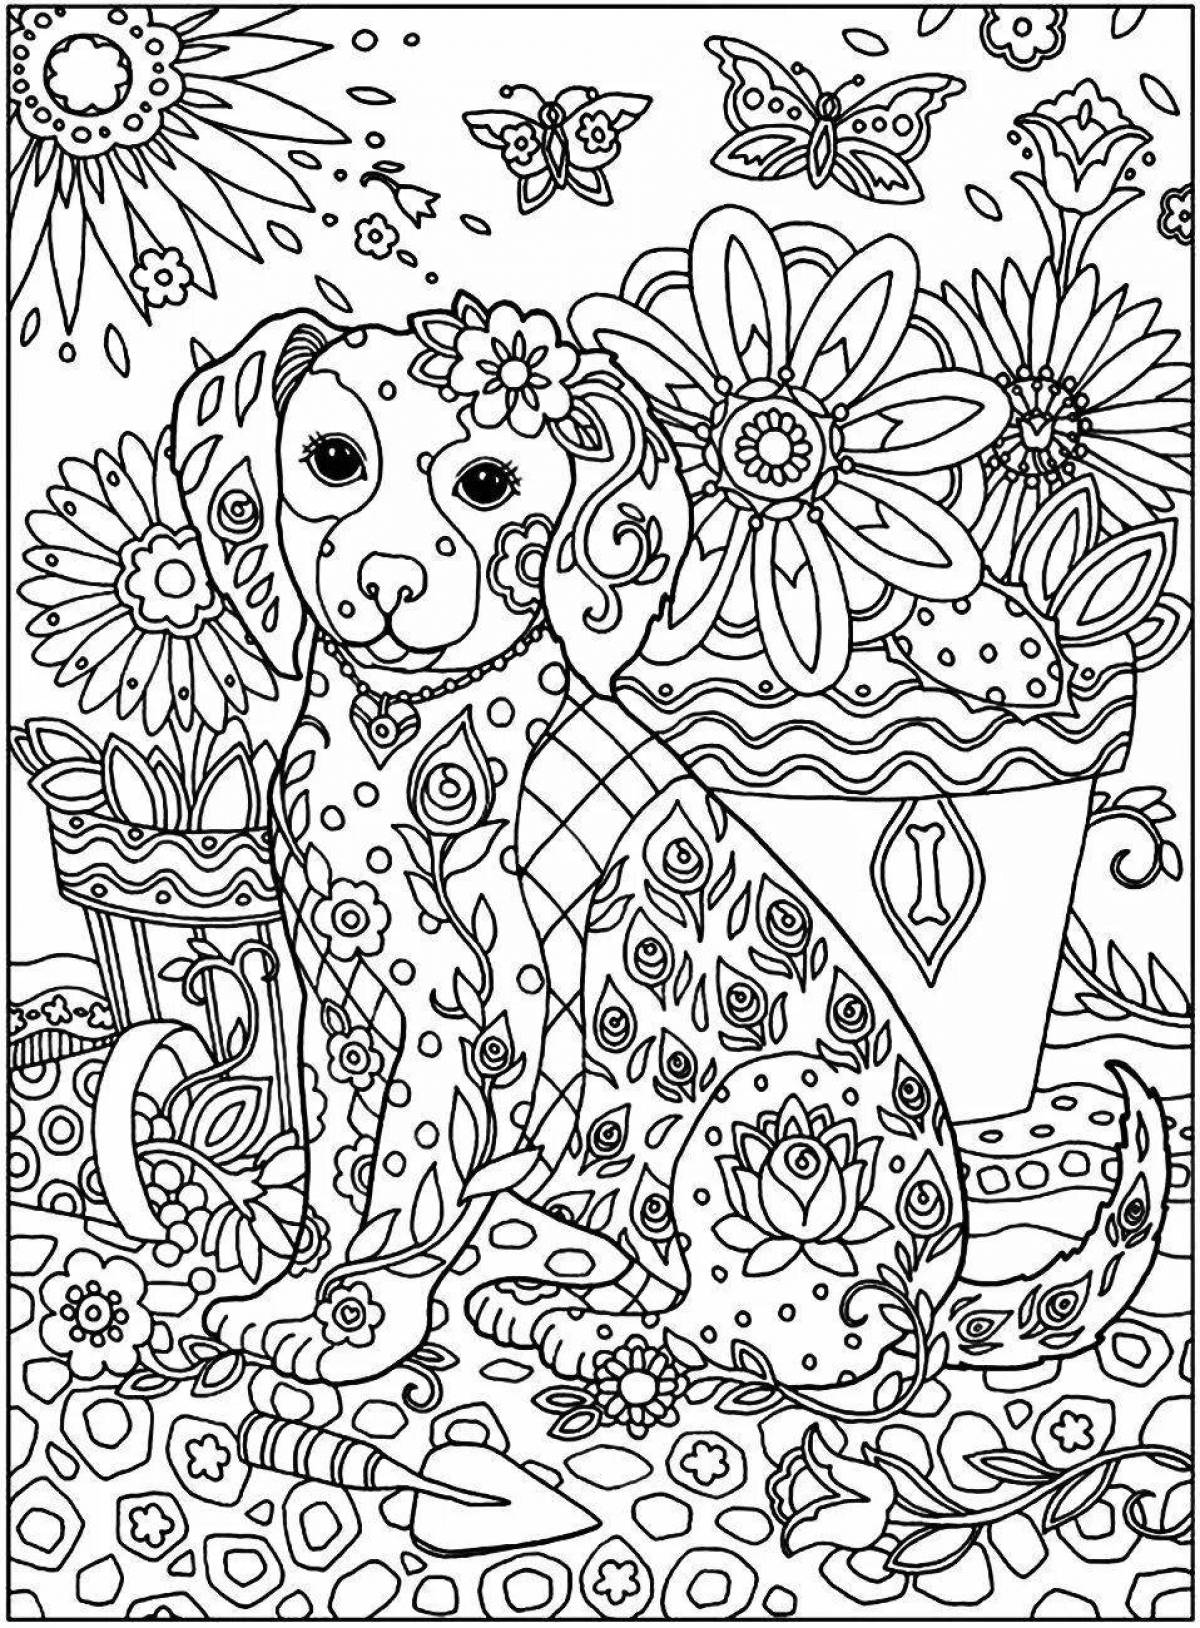 Colourful antistress coloring book for girls 8 years old